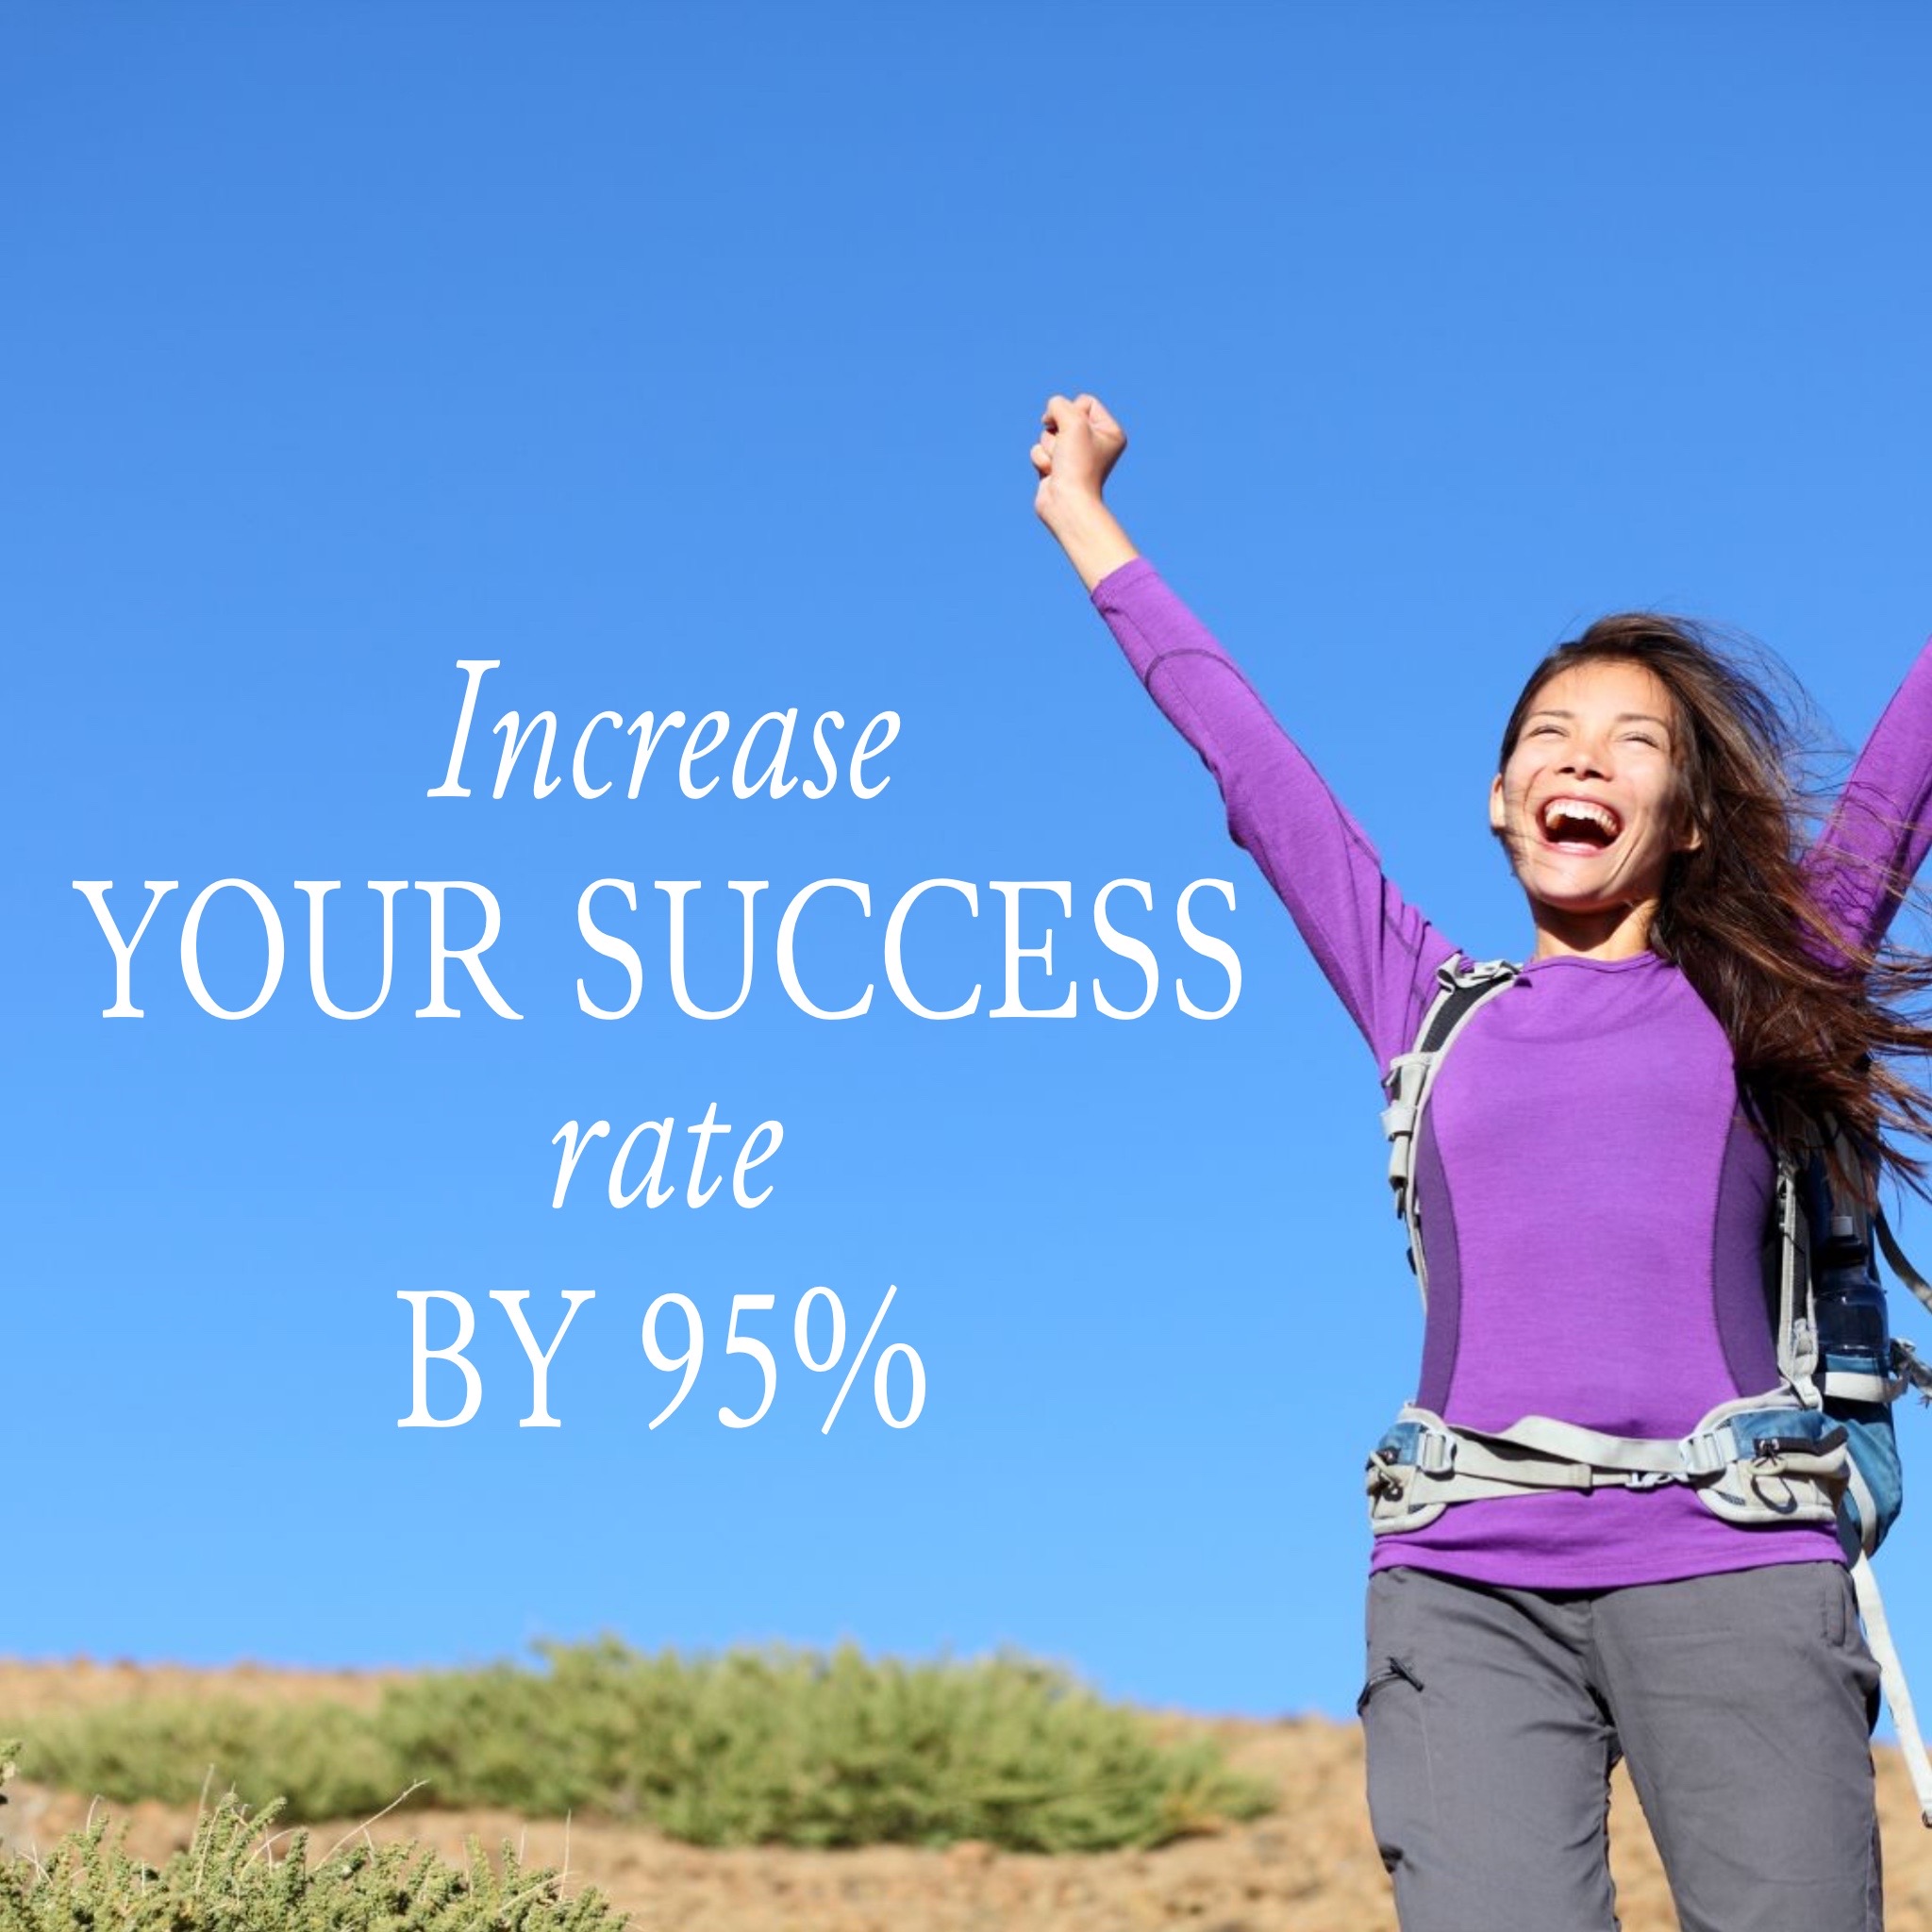 Would you like to be exponentially more successful?